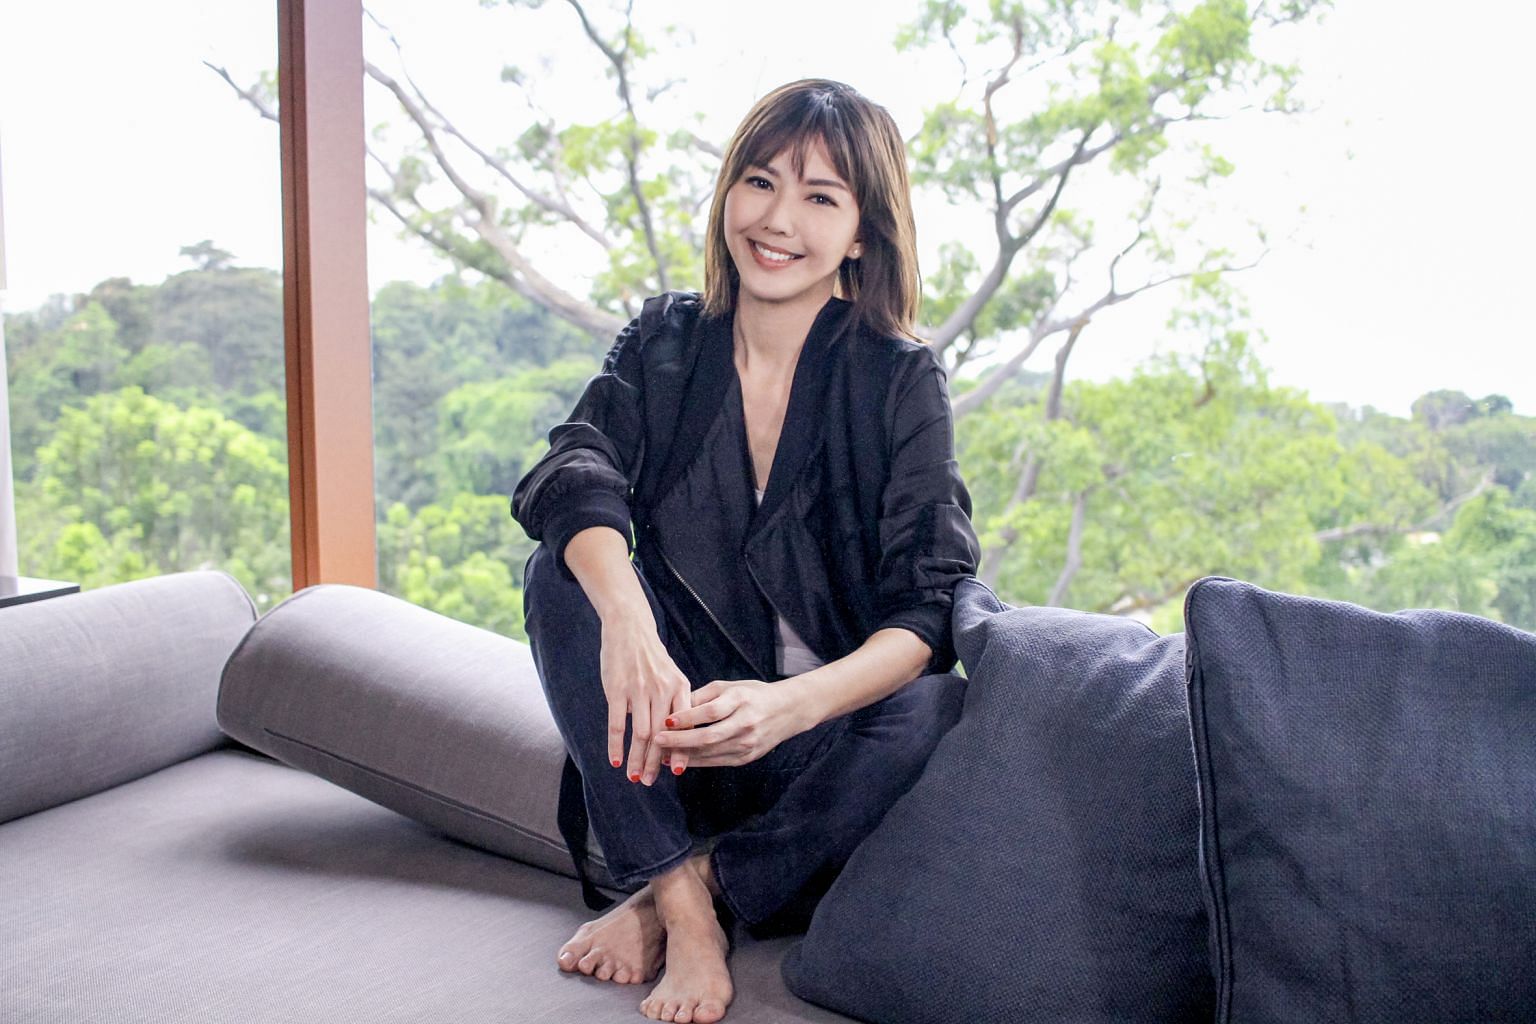 Check out: How singer Stefanie Sun spends her time at home